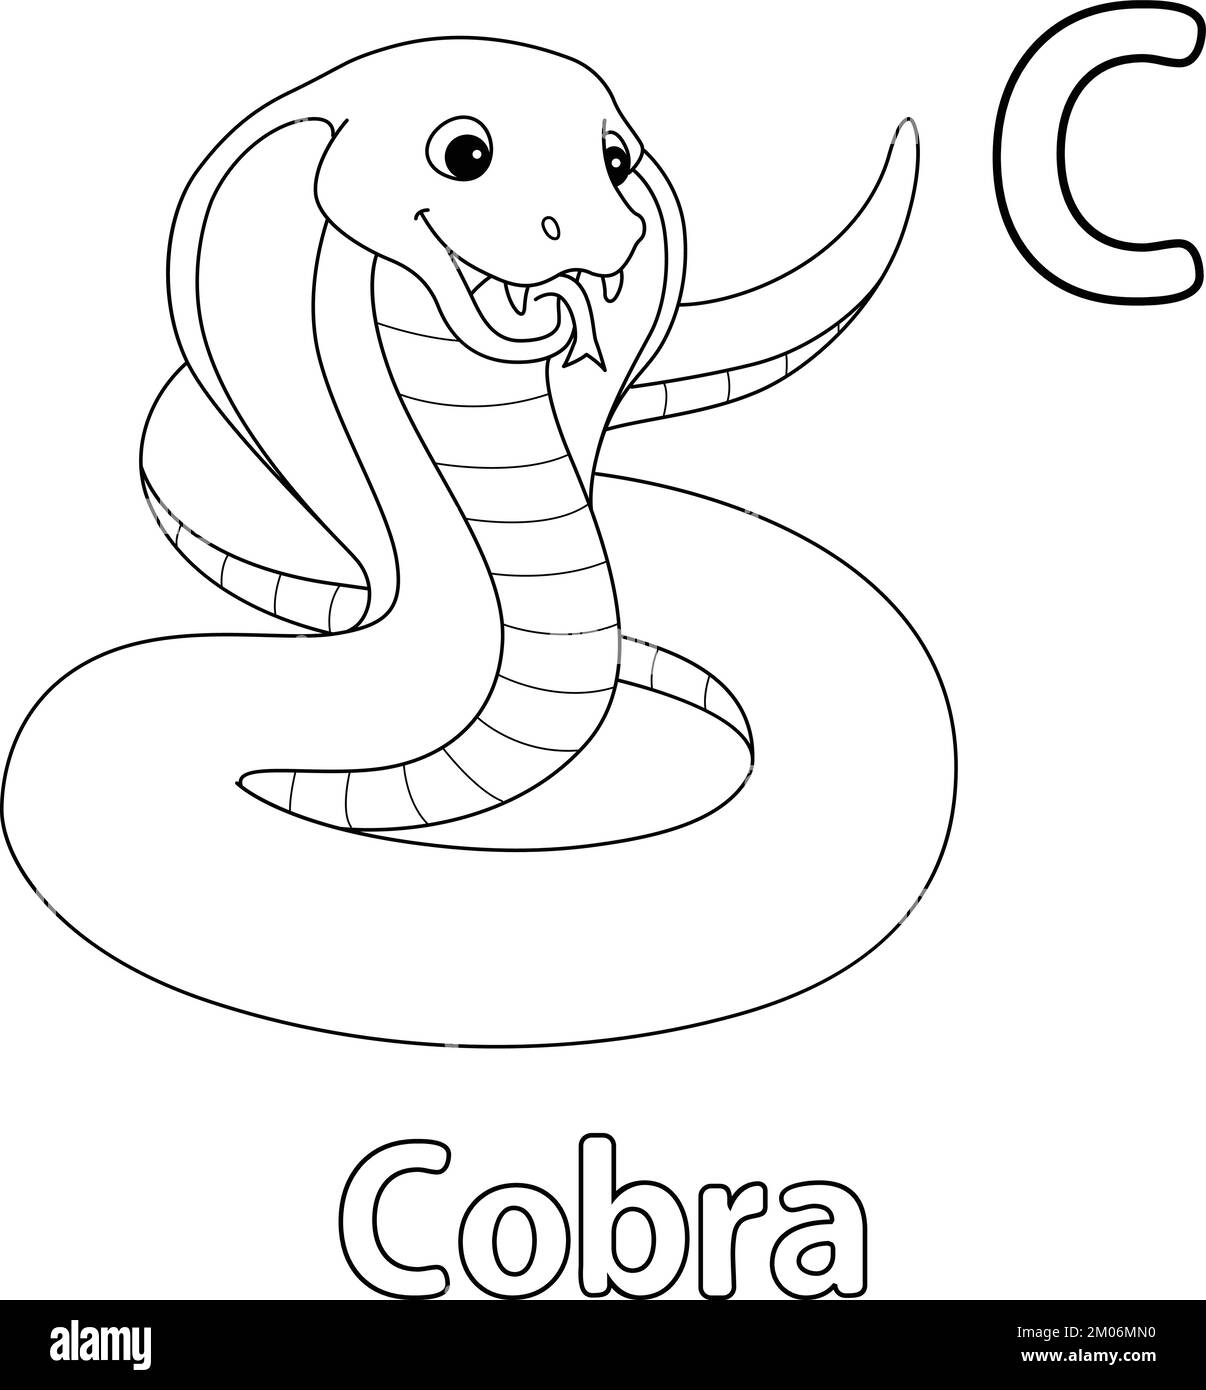 Cobra Animal Alphabet ABC Isolated Coloring Page C Stock Vector